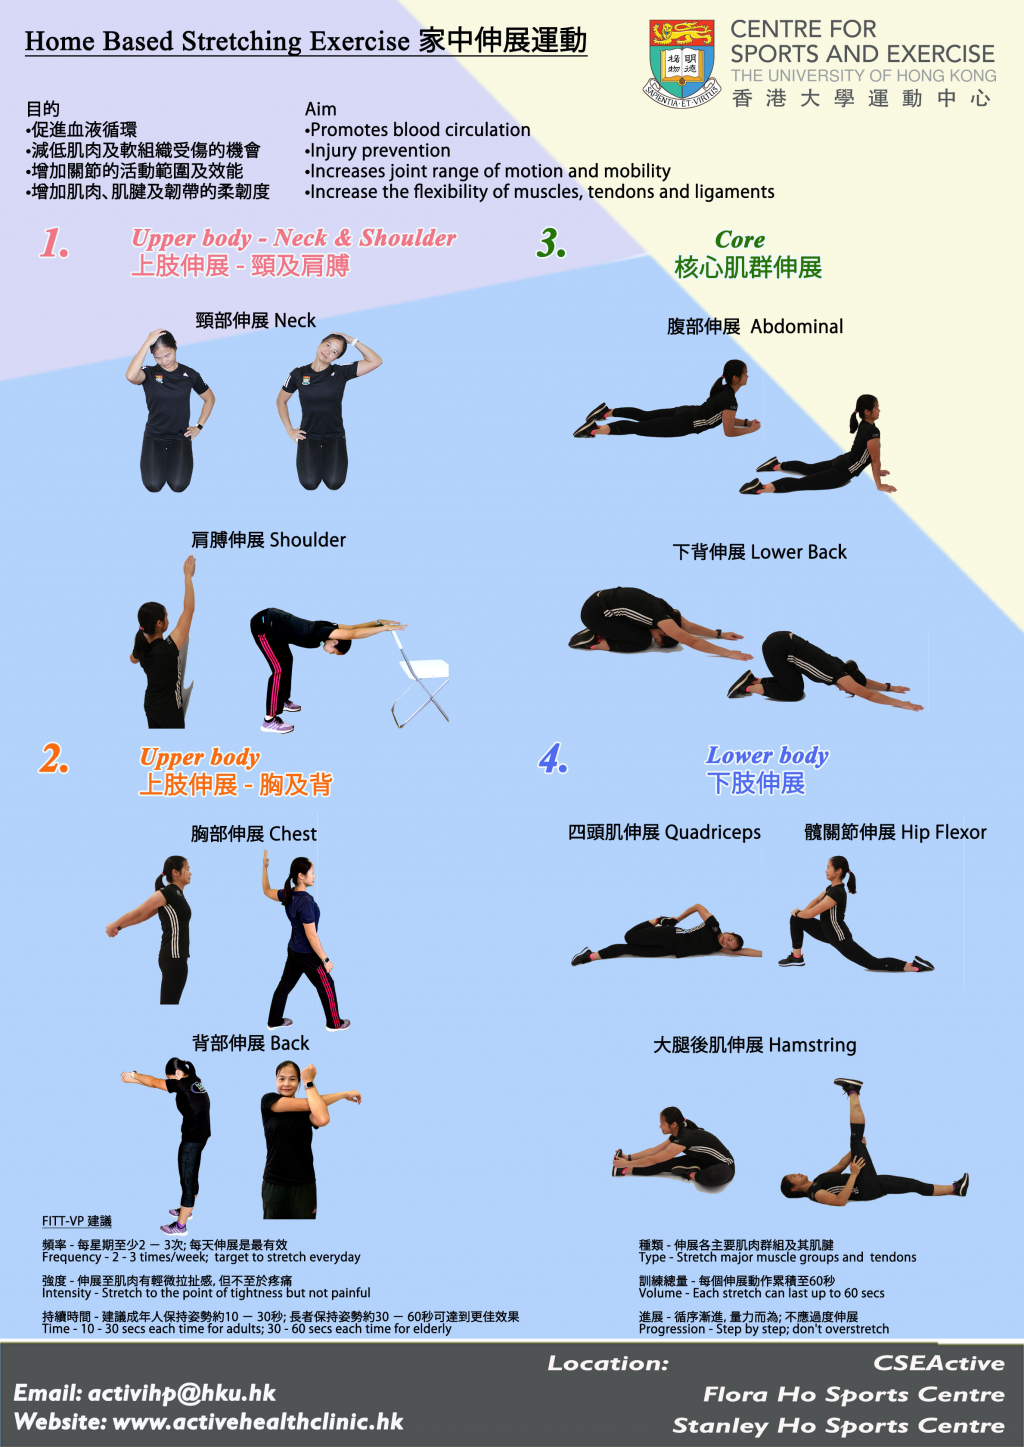 Home Based Stretching Exercise